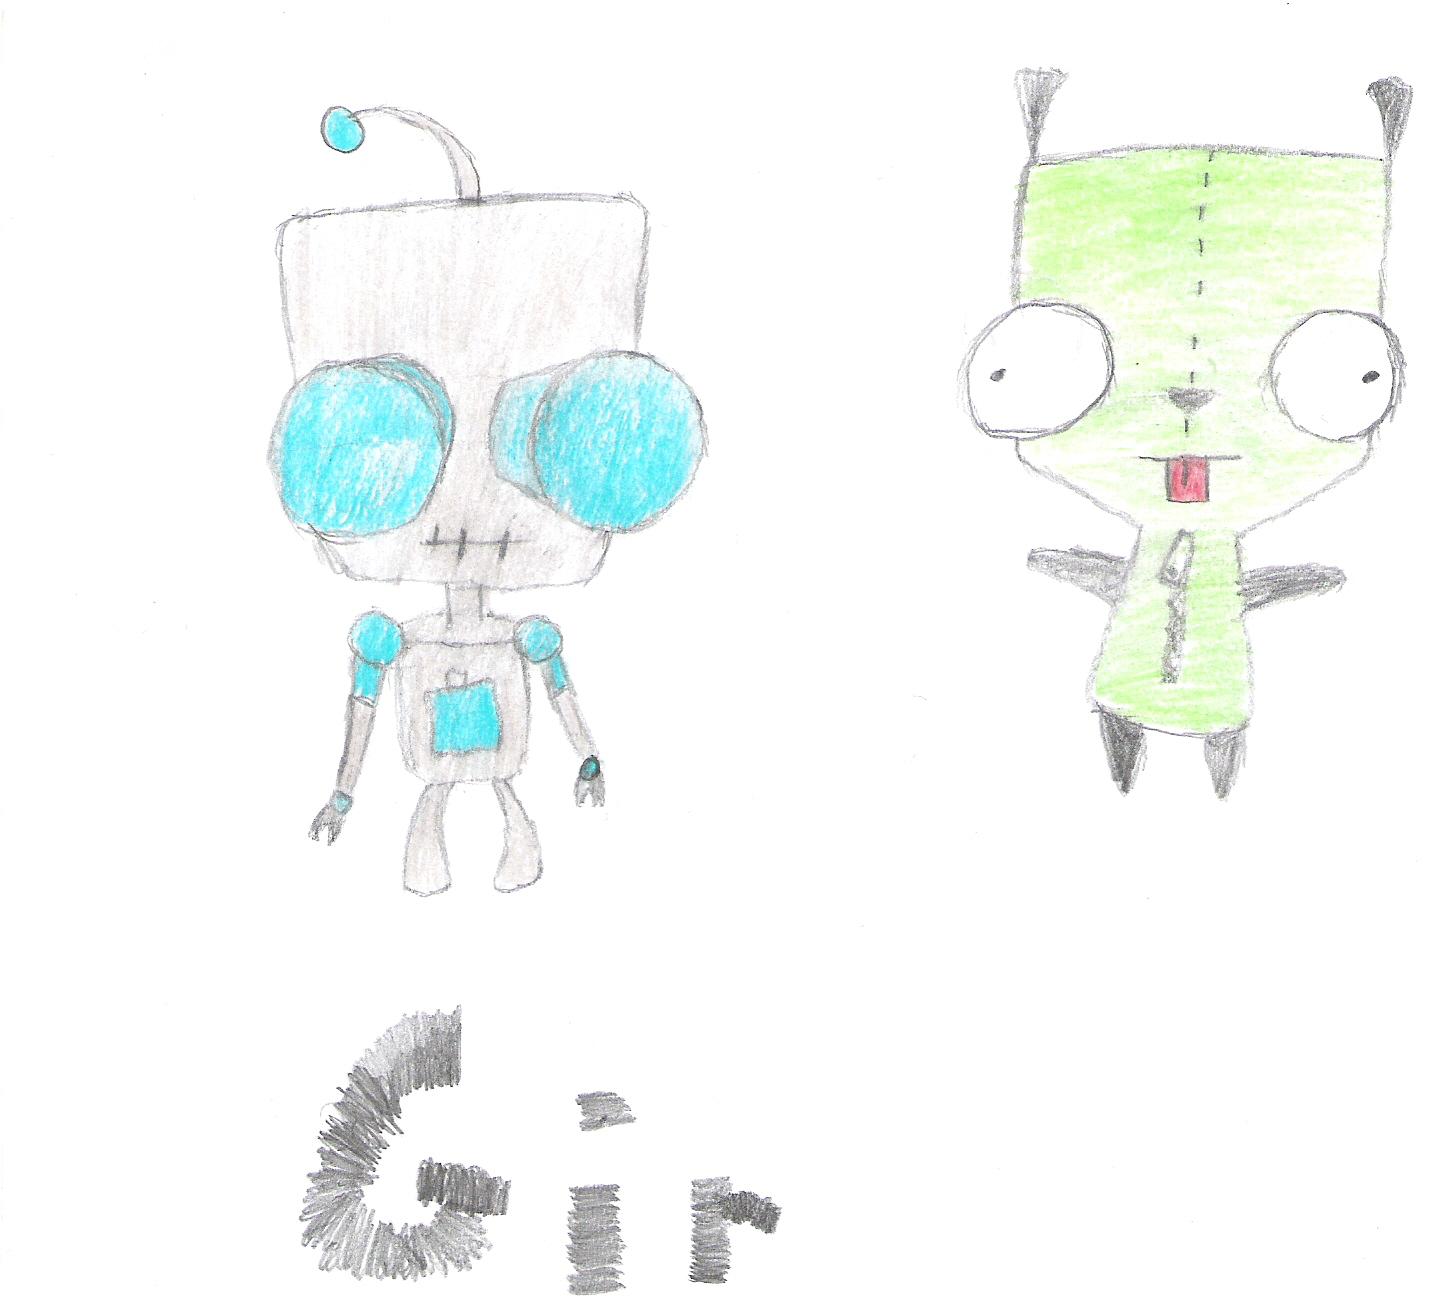 Gir by deathcomesswiftlytocowards